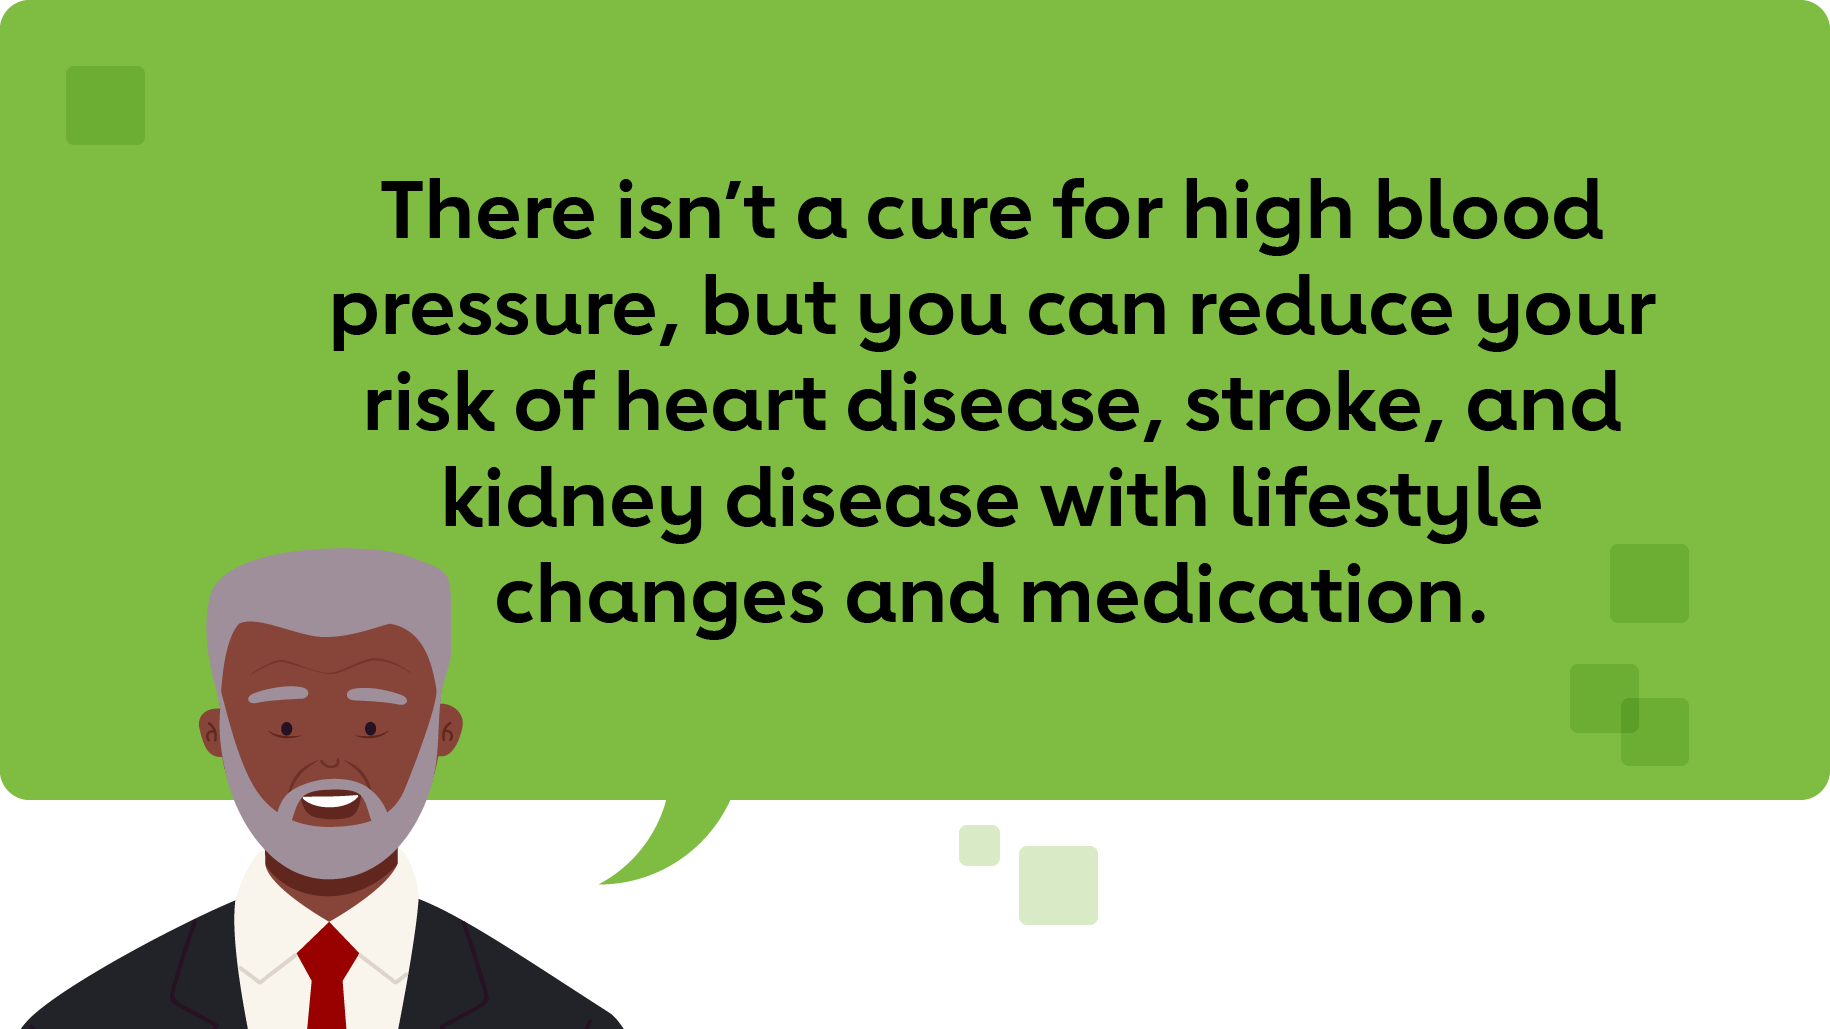 There isn’t a cure for high blood pressure, but you can reduce your risk of heart disease, stroke, and kidney disease with lifestyle changes and medication.